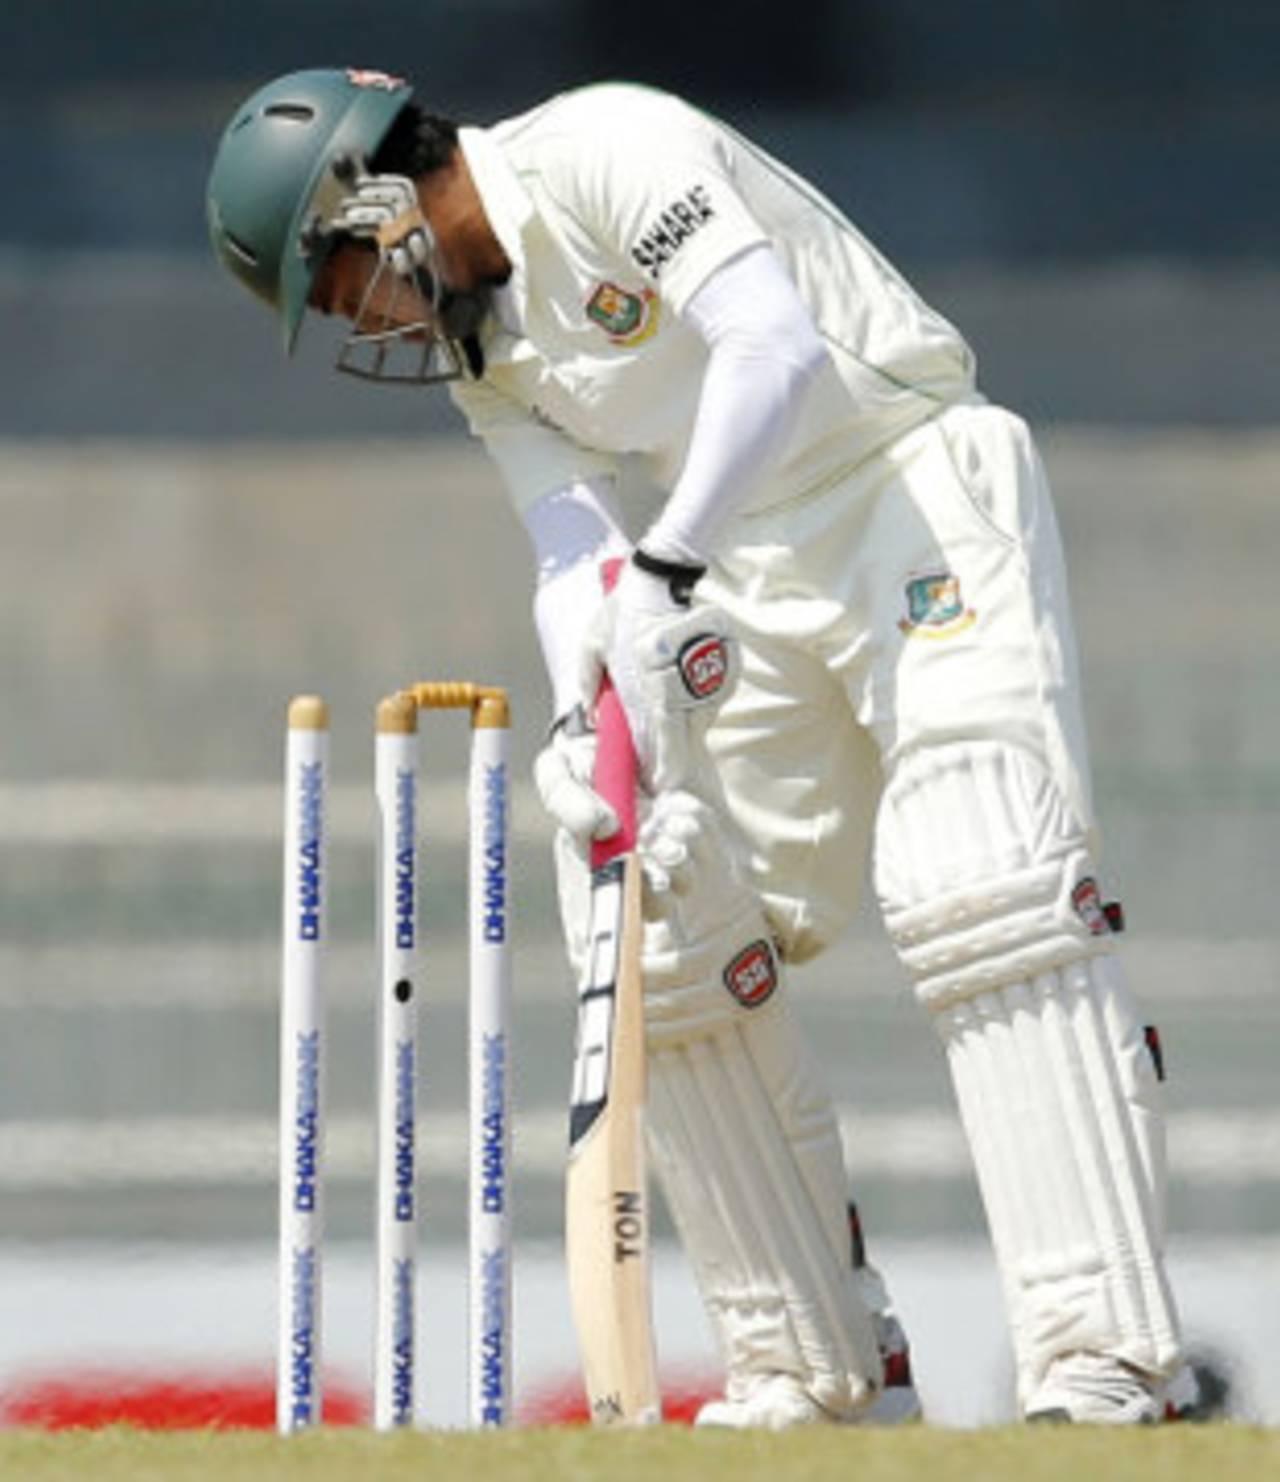 Mushfiqur Rahim's dismissal could not be directly blamed on the lack of speed of the outfield, but was influenced by what was happening at the other end&nbsp;&nbsp;&bull;&nbsp;&nbsp;Associated Press